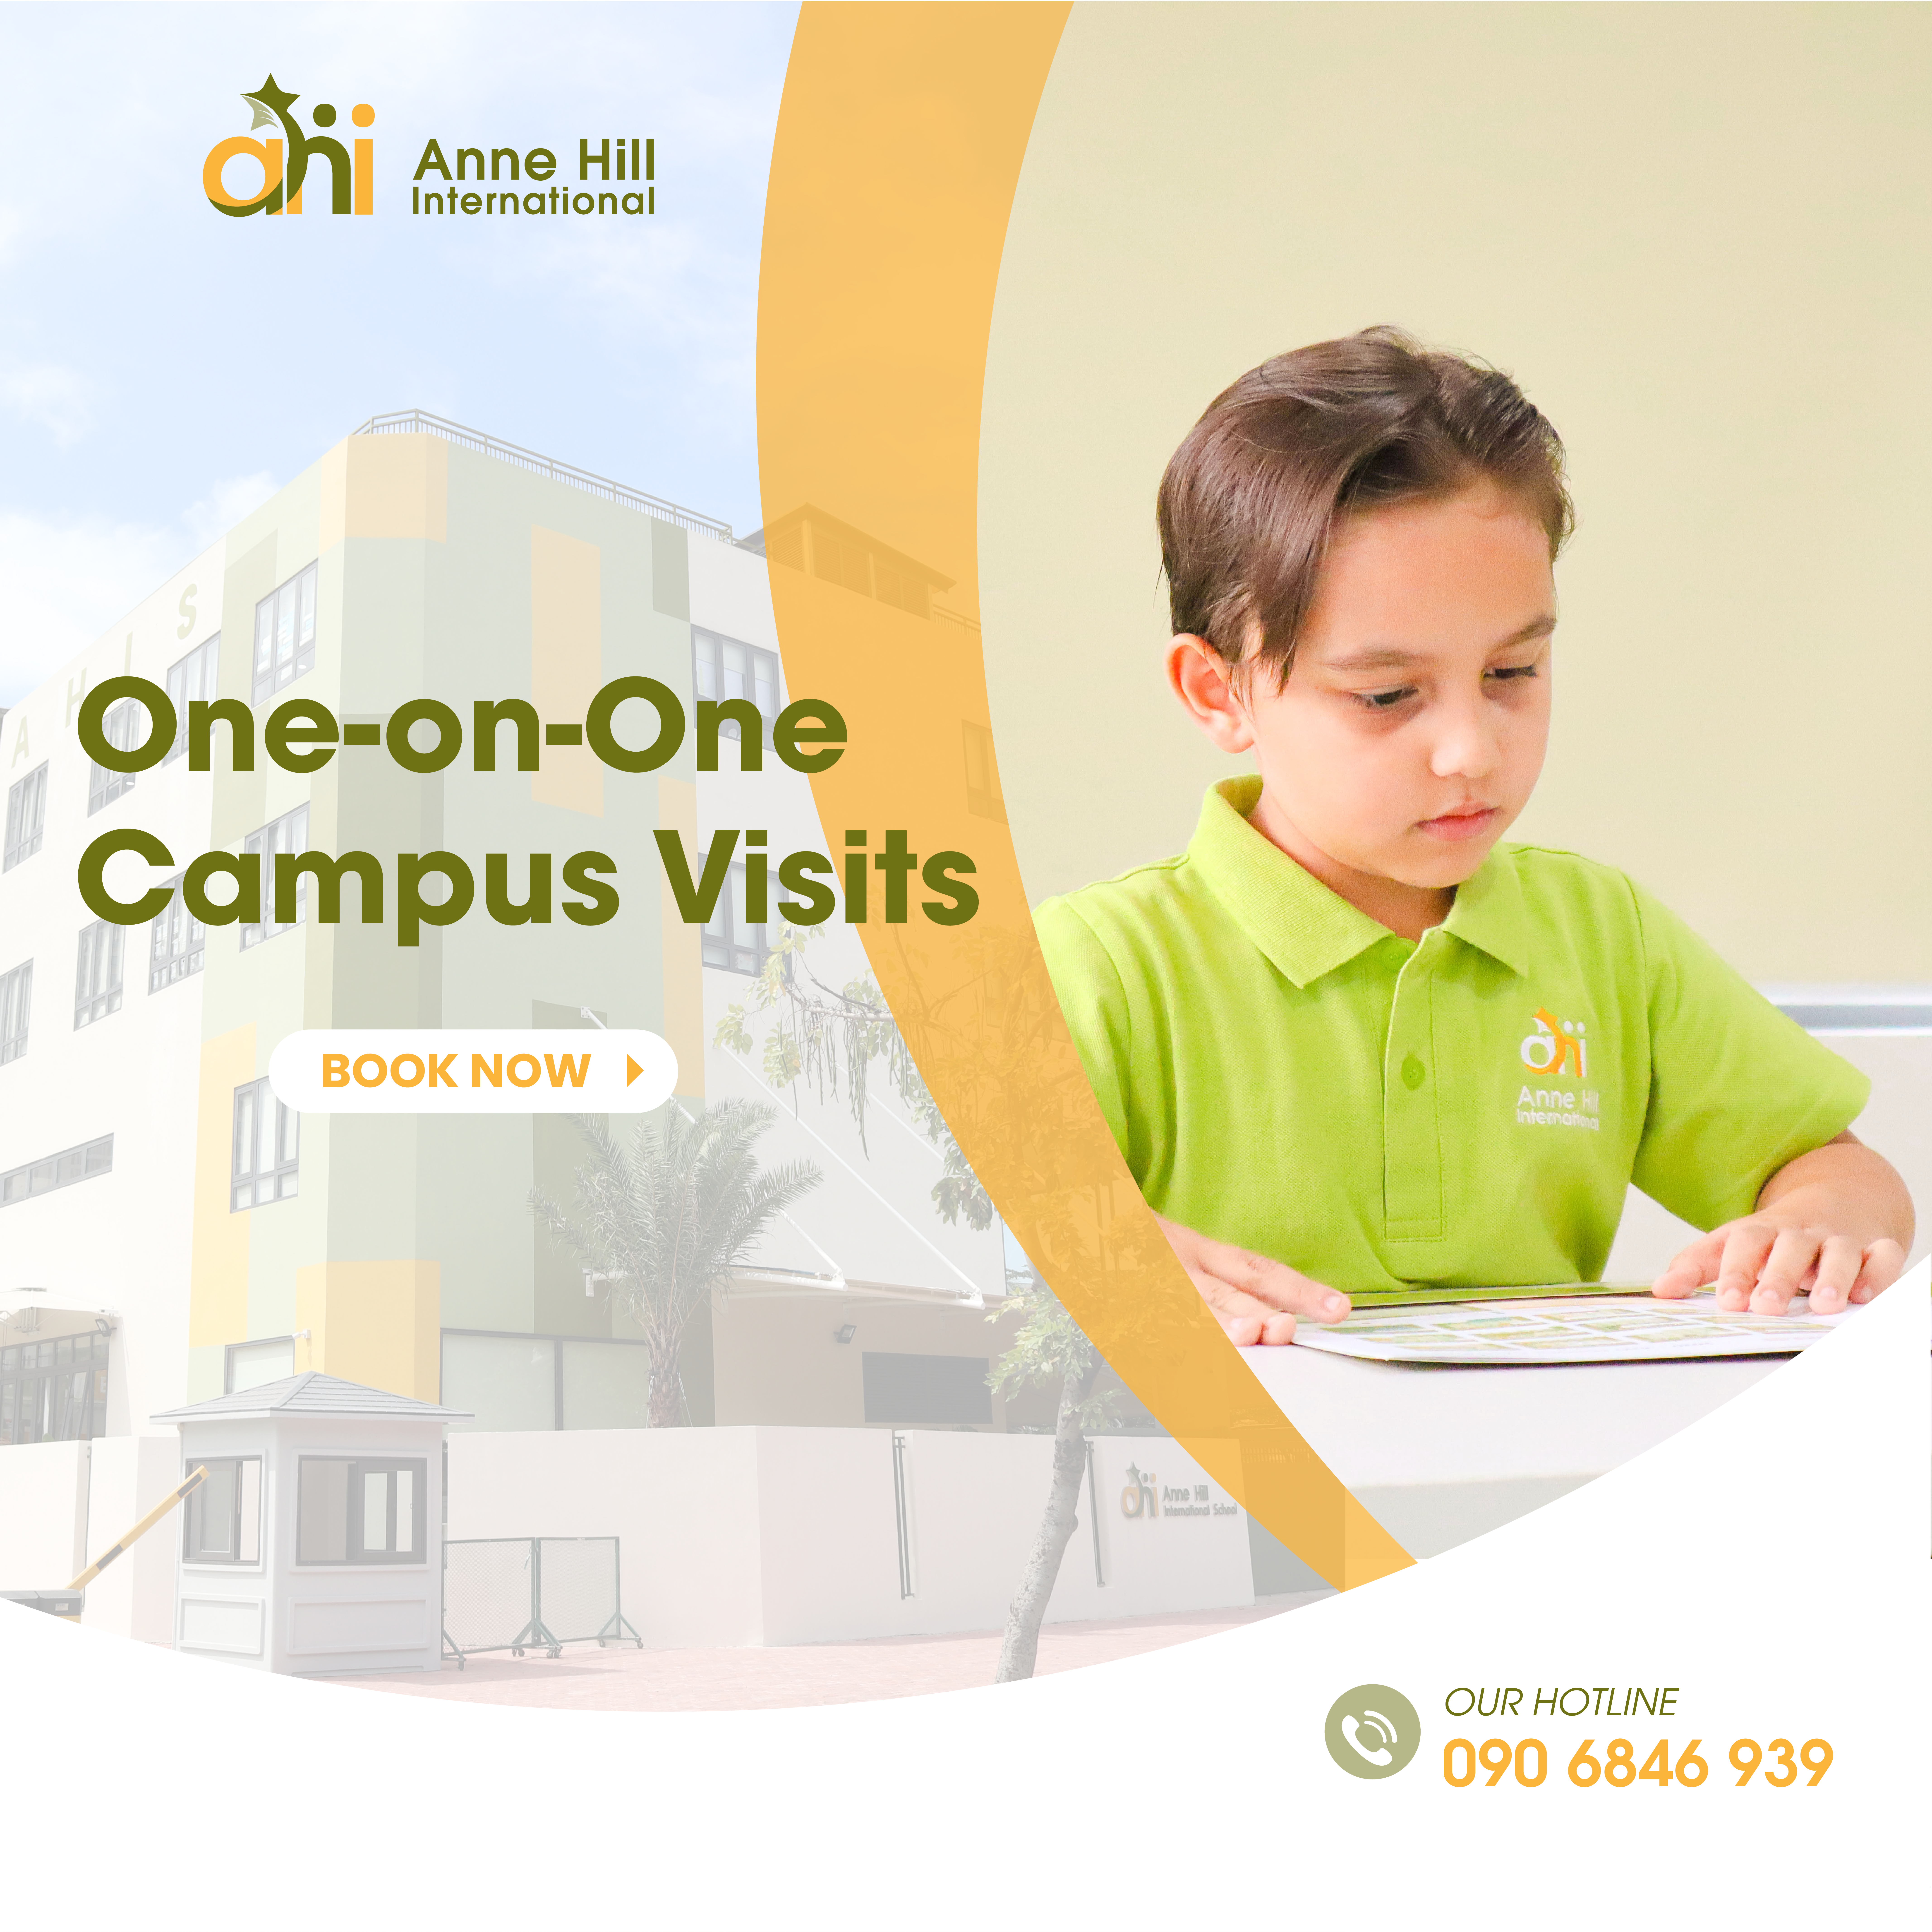 One-on-One Campus Visits